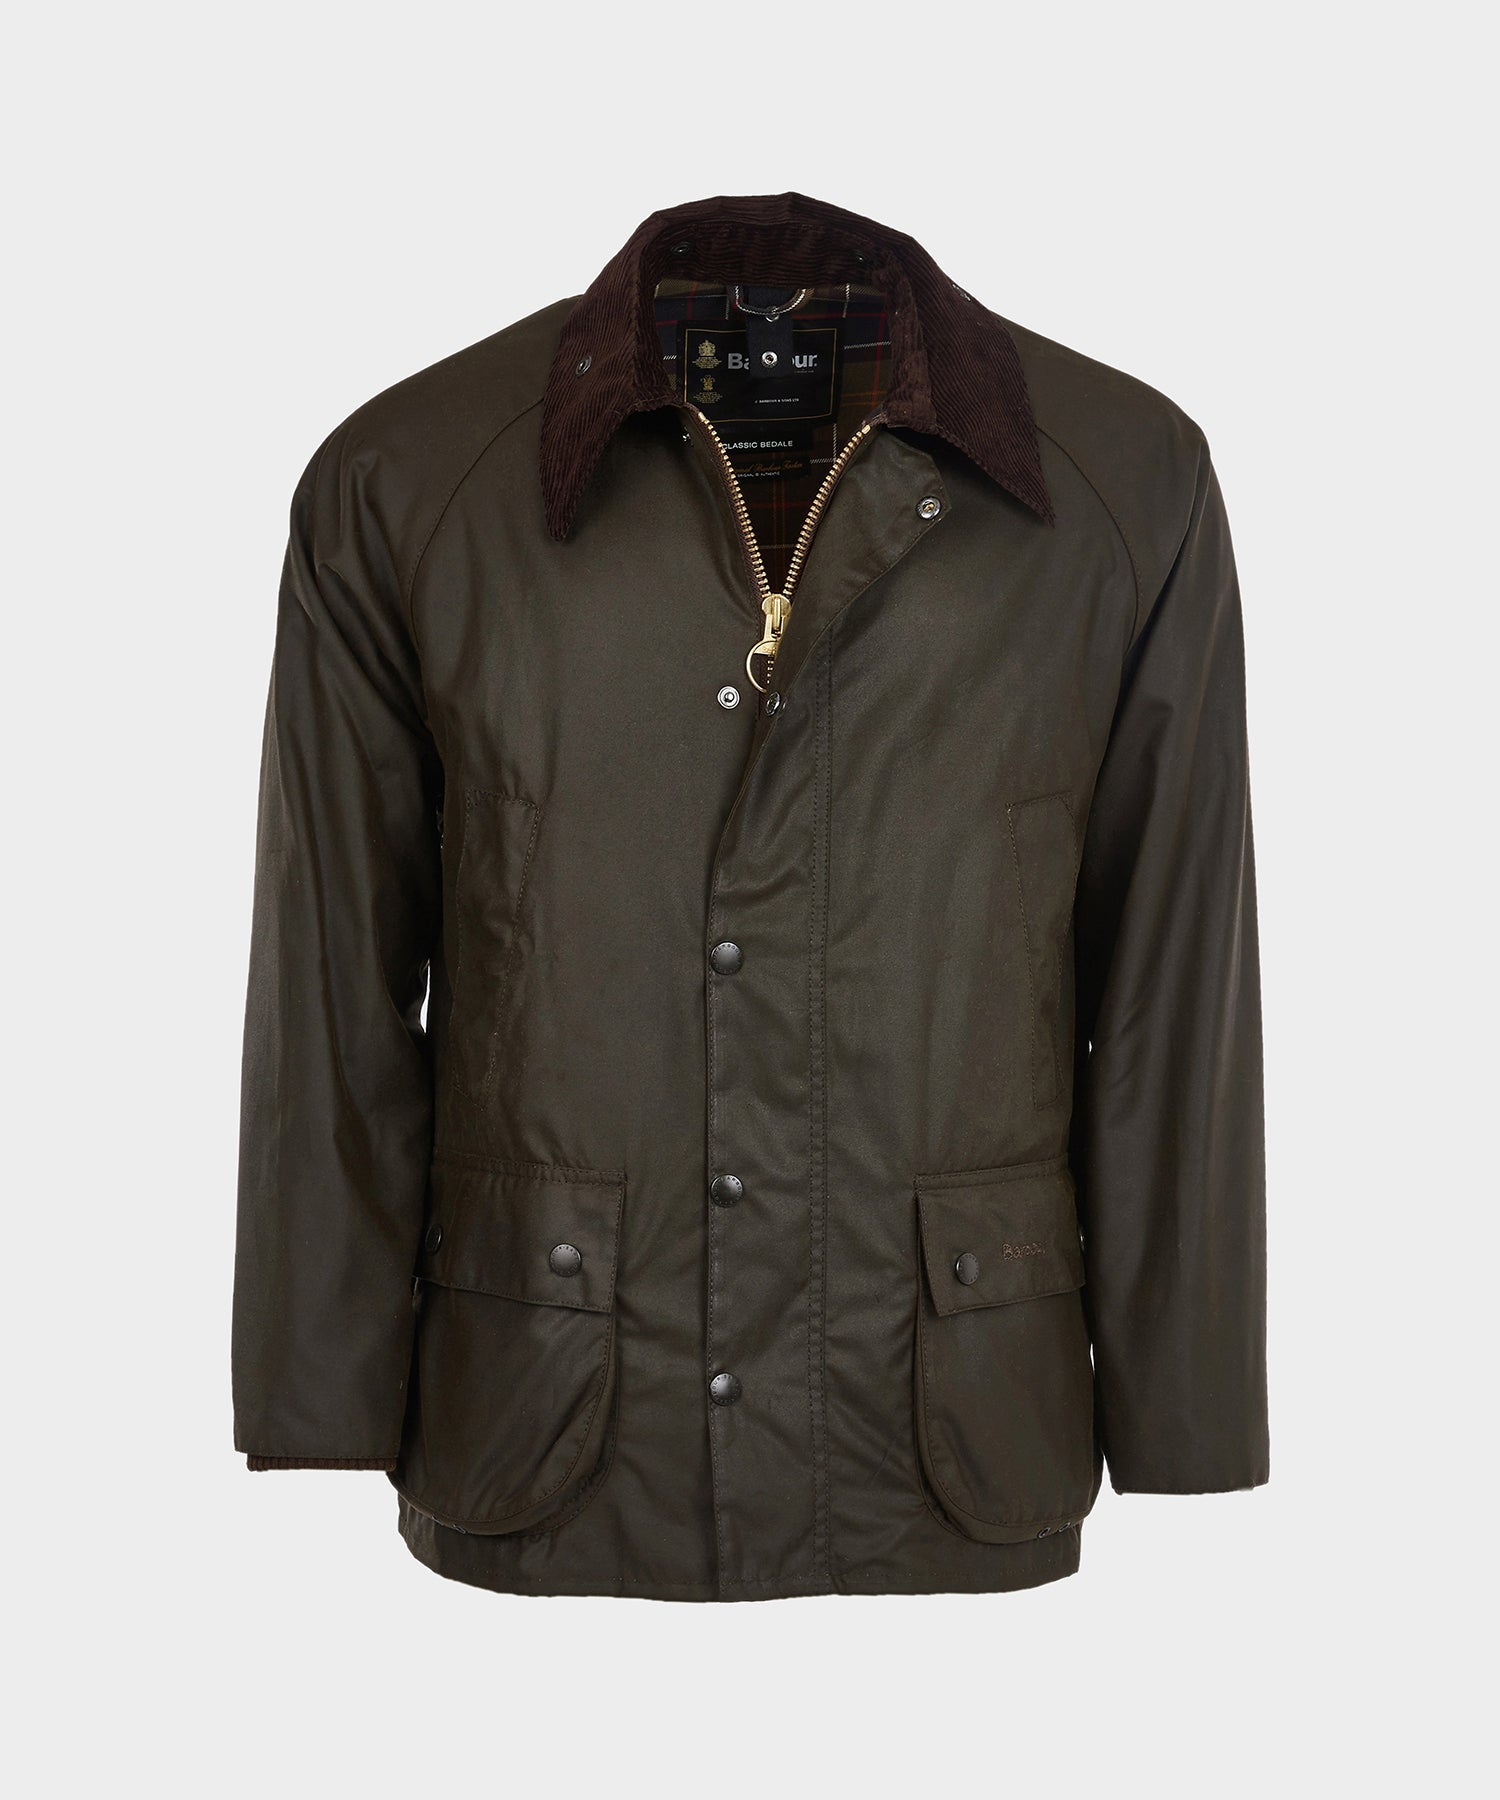 Barbour Classic Bedale Wax Jacket in Olive